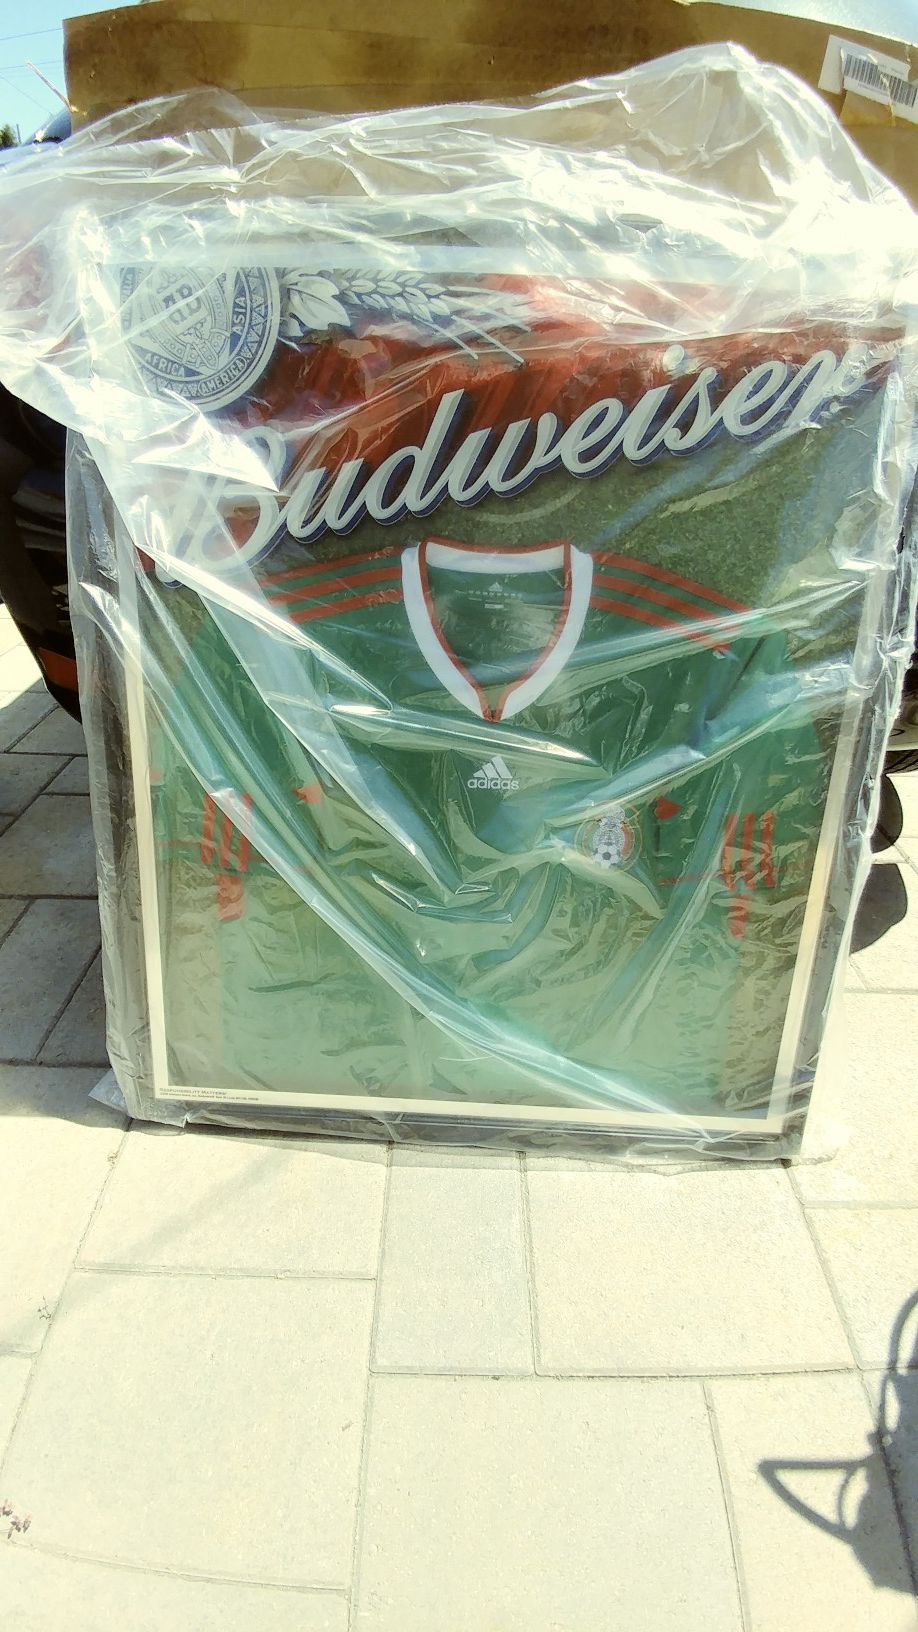 TECATE BEER SIGN XOLOS DE TIJUANA FRAMED SOCCER JERSEY BRAND NEW SELECCION  MEXICANA BUD LIGHT BUDWEISER for Sale in La Puente, CA - OfferUp